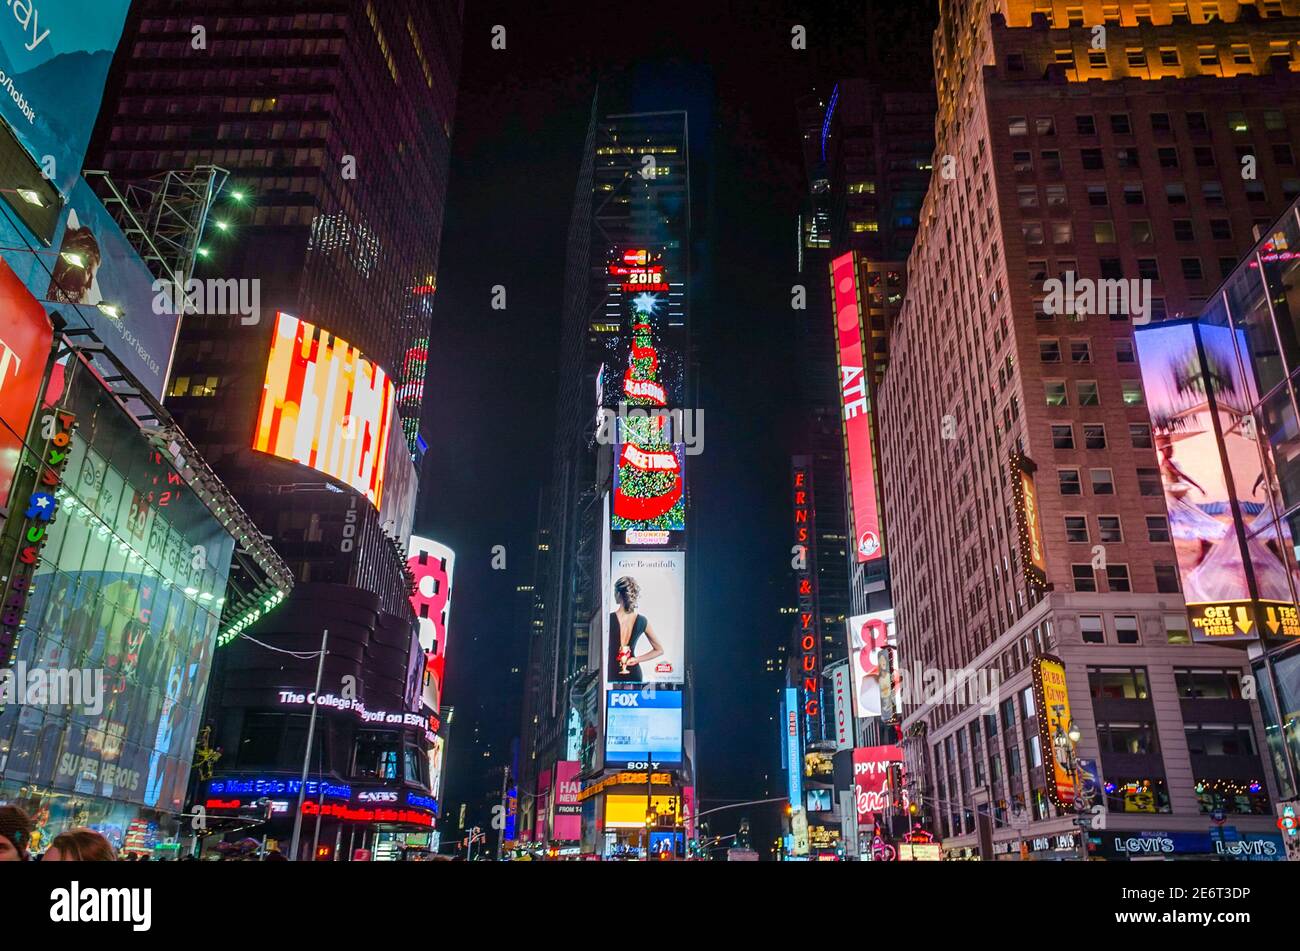 Famous Toshiba New York Tower with Animated Screens in Times Square at Night. New York City, USA Stock Photo